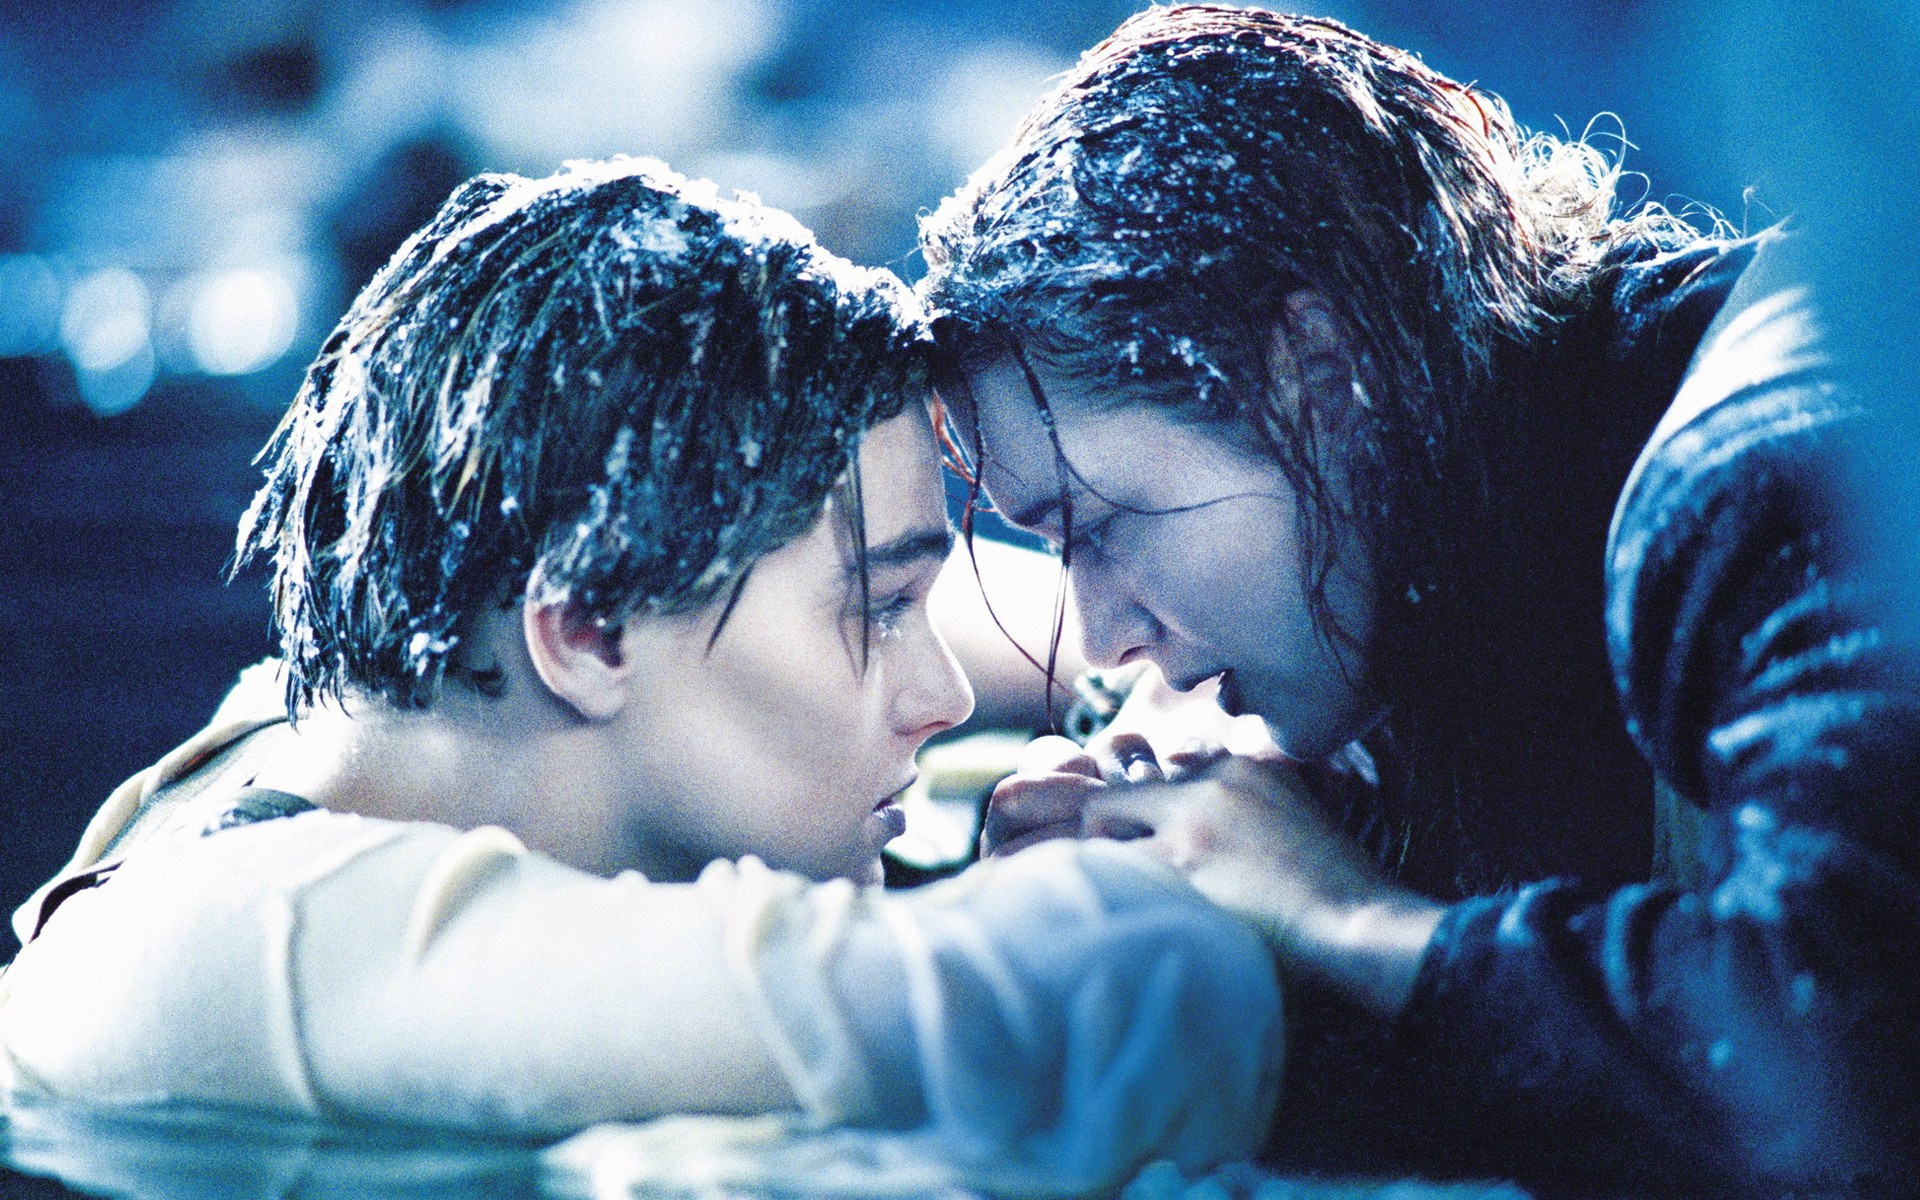 titanic, Cold, Death, Love, Romance, Mood, Emotion, Situation, People, Celebrities, Actress, Actor, Winslett, Dicaprio Wallpaper